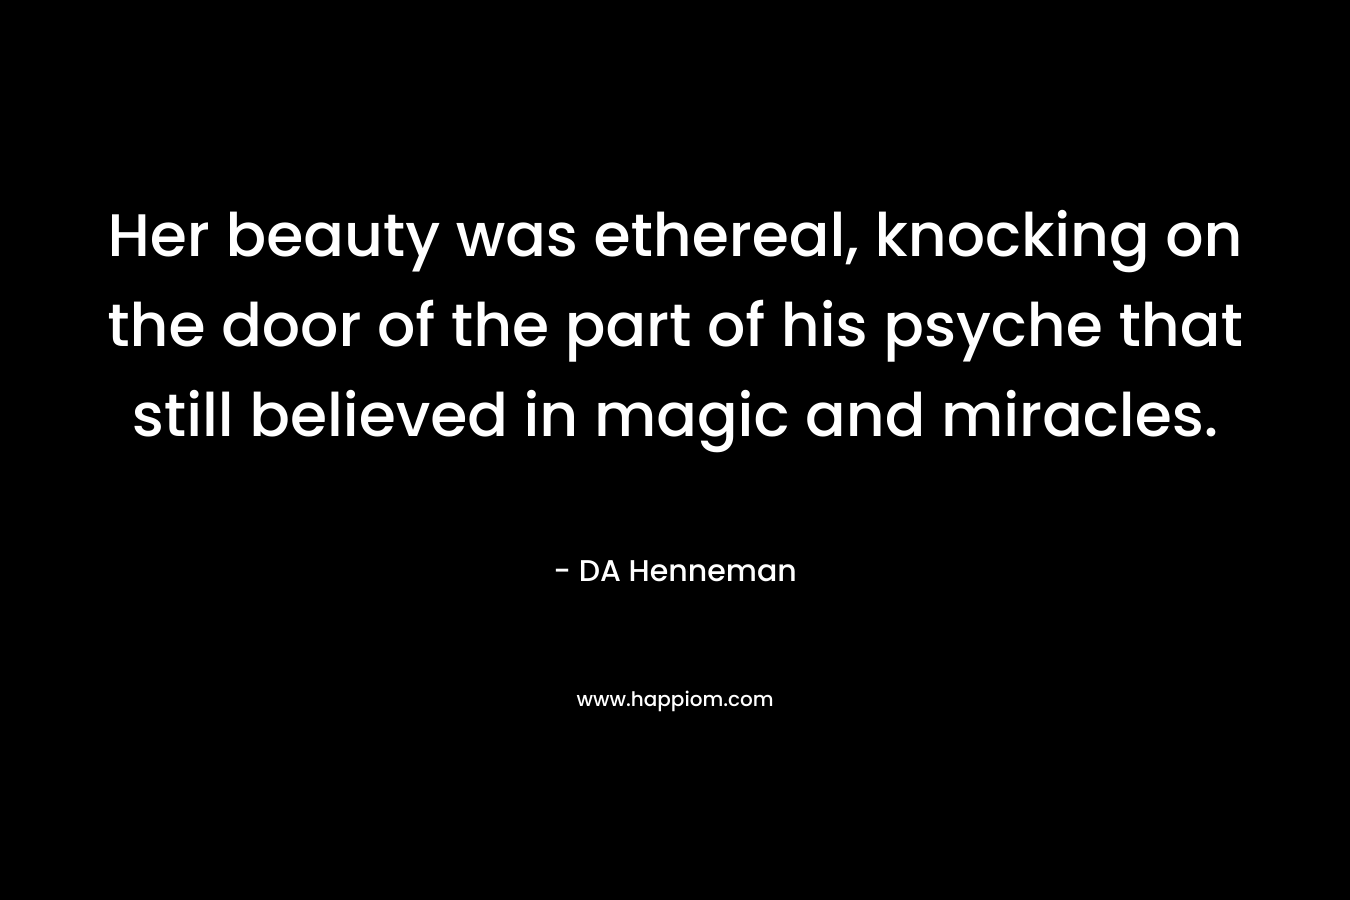 Her beauty was ethereal, knocking on the door of the part of his psyche that still believed in magic and miracles. – DA Henneman